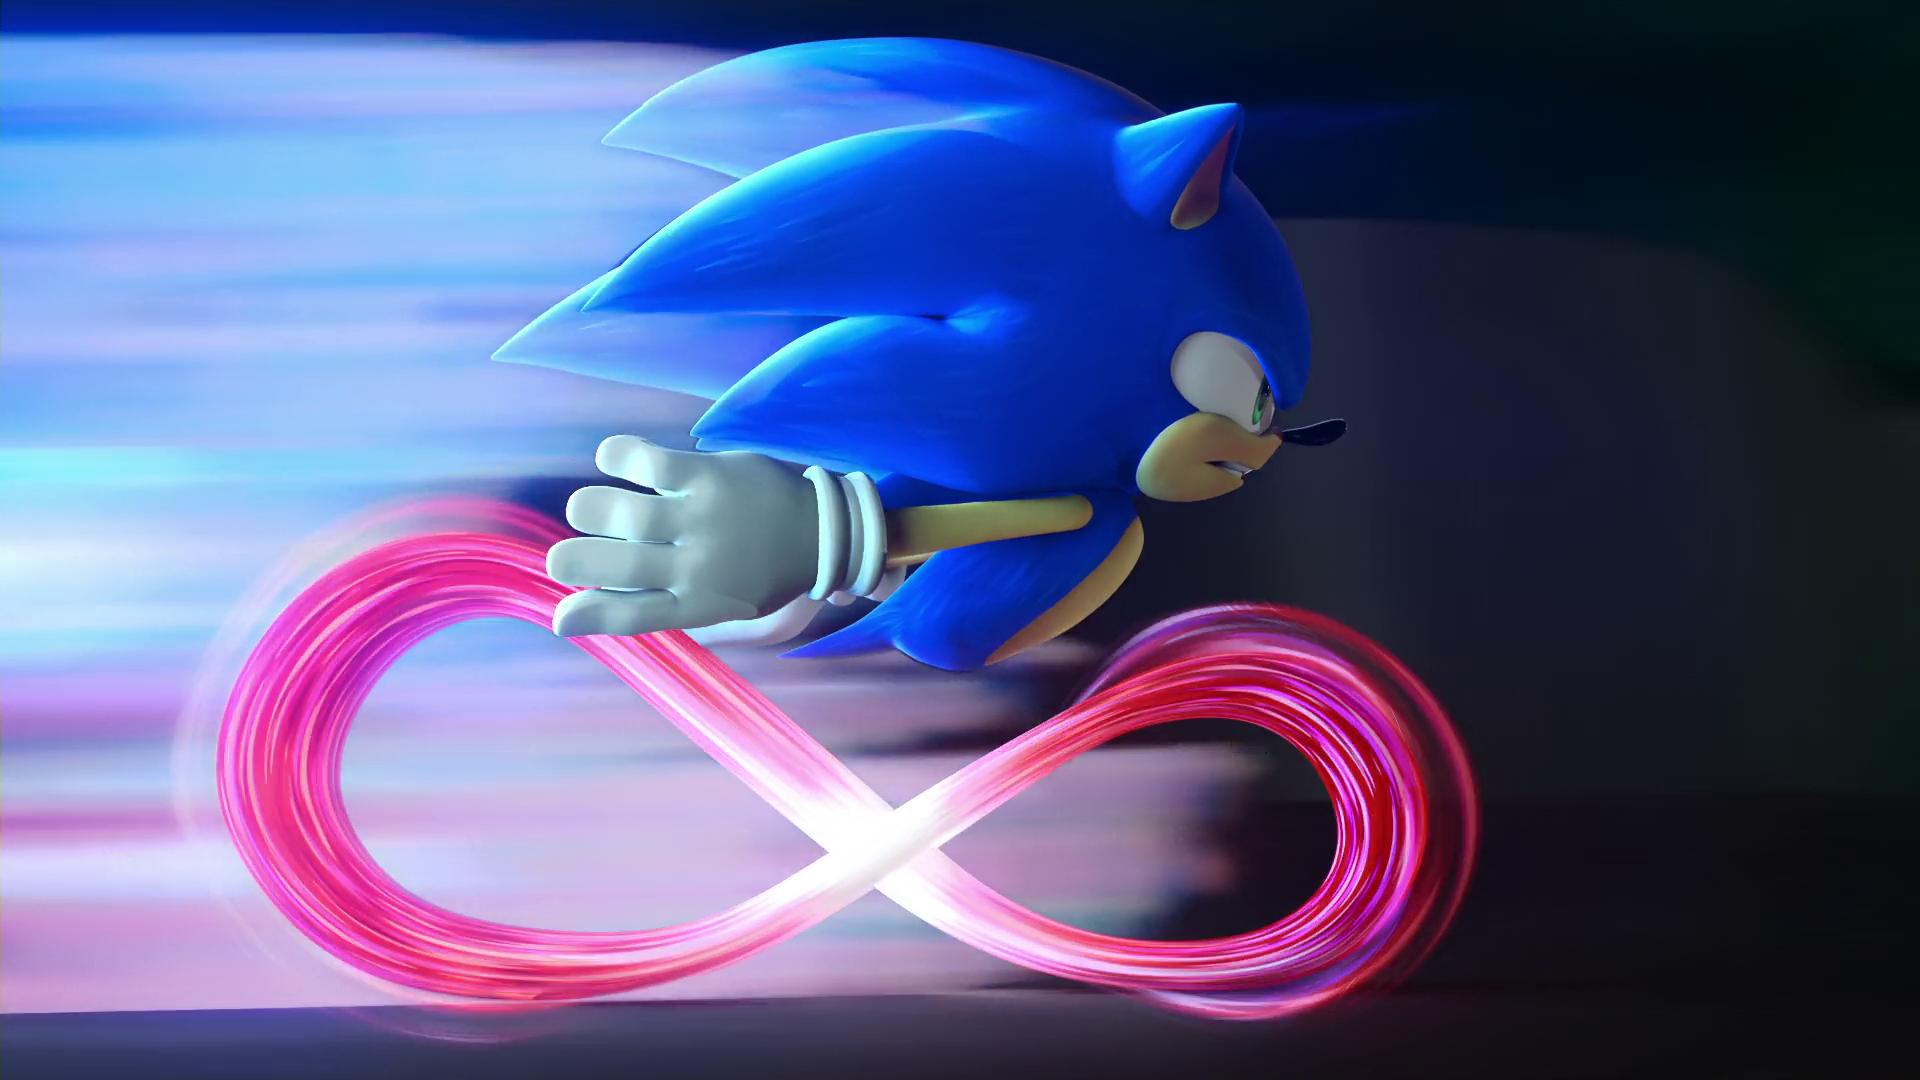 https://static.wikia.nocookie.net/sonic/images/e/e8/Shattered_108.png/revision/latest?cb=20221216061642